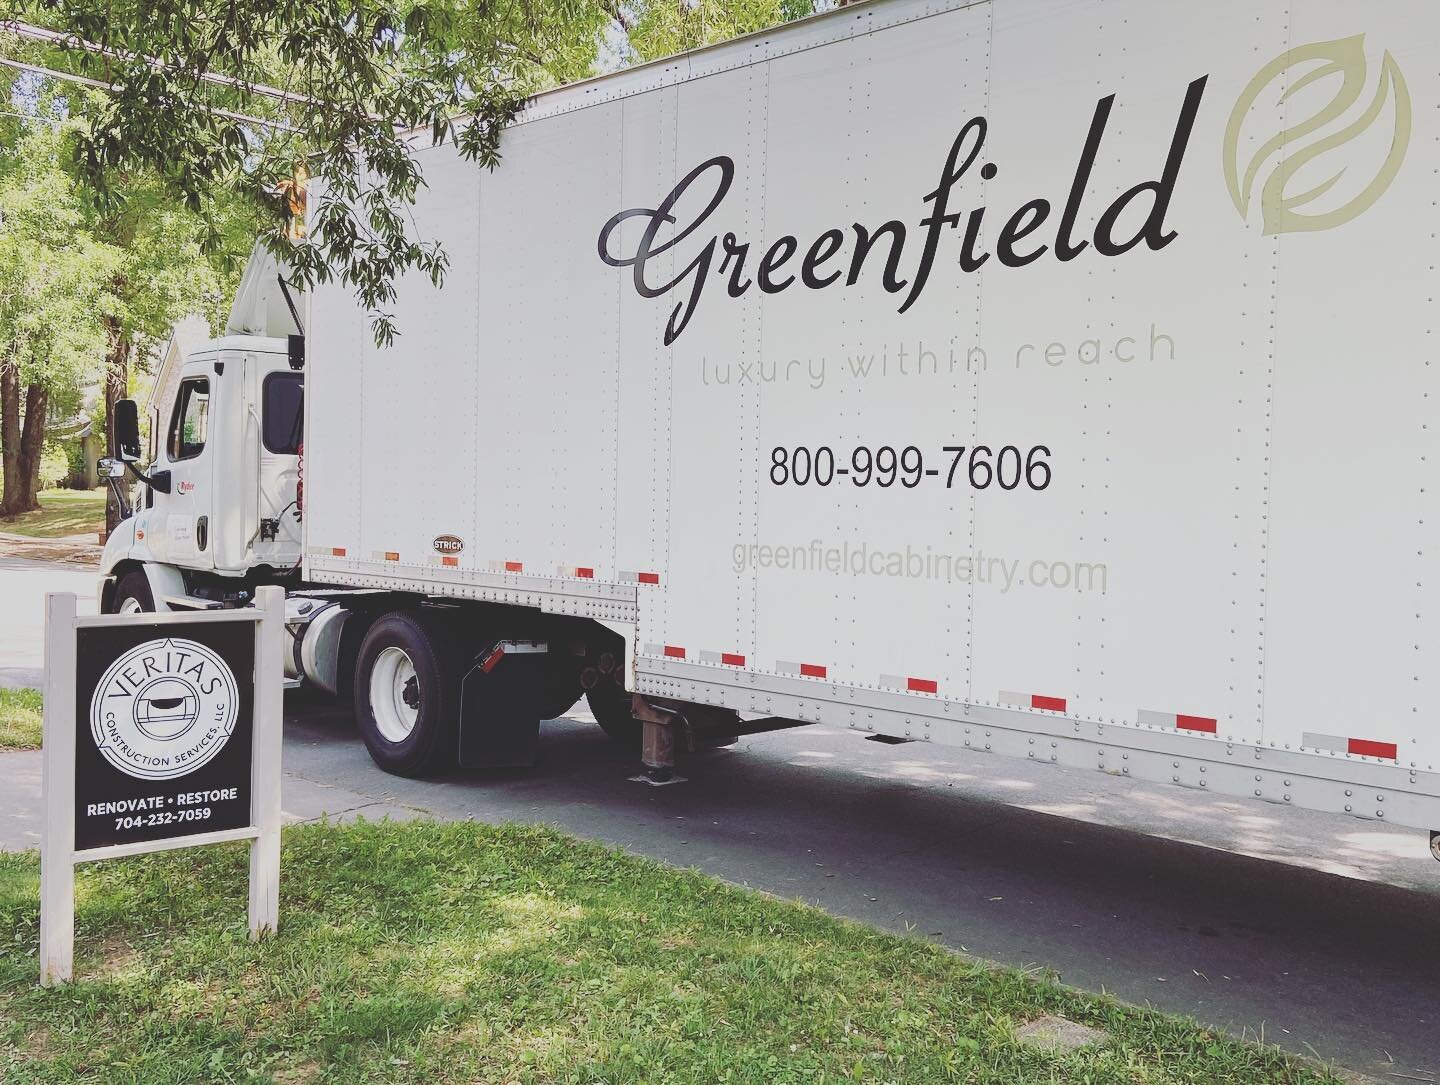 Cabinet delivery day is our favorite day! @tcg.greenfieldcabinetry @sitelinecabinetry #newcabinets #charlottenc #charlottebuilder #kitchenremodel #kitchencabinets #kitchendesign #elizabethneighborhood